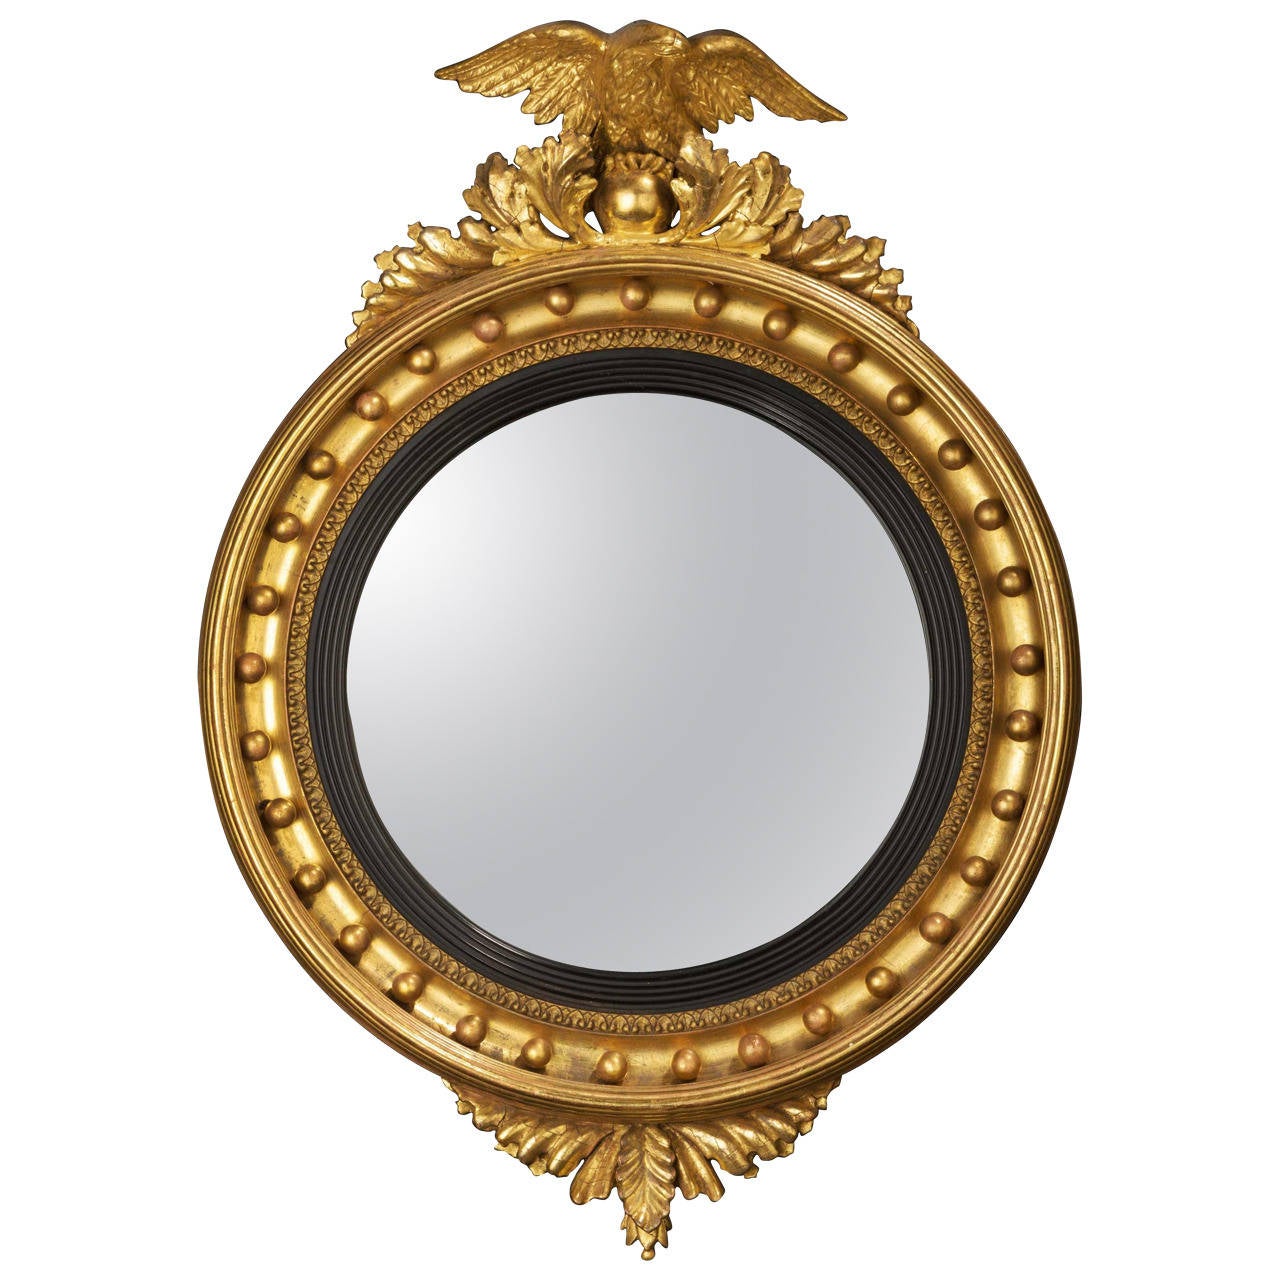 Regency Period Convex Mirror Surmounted with a Small Carved Eagle